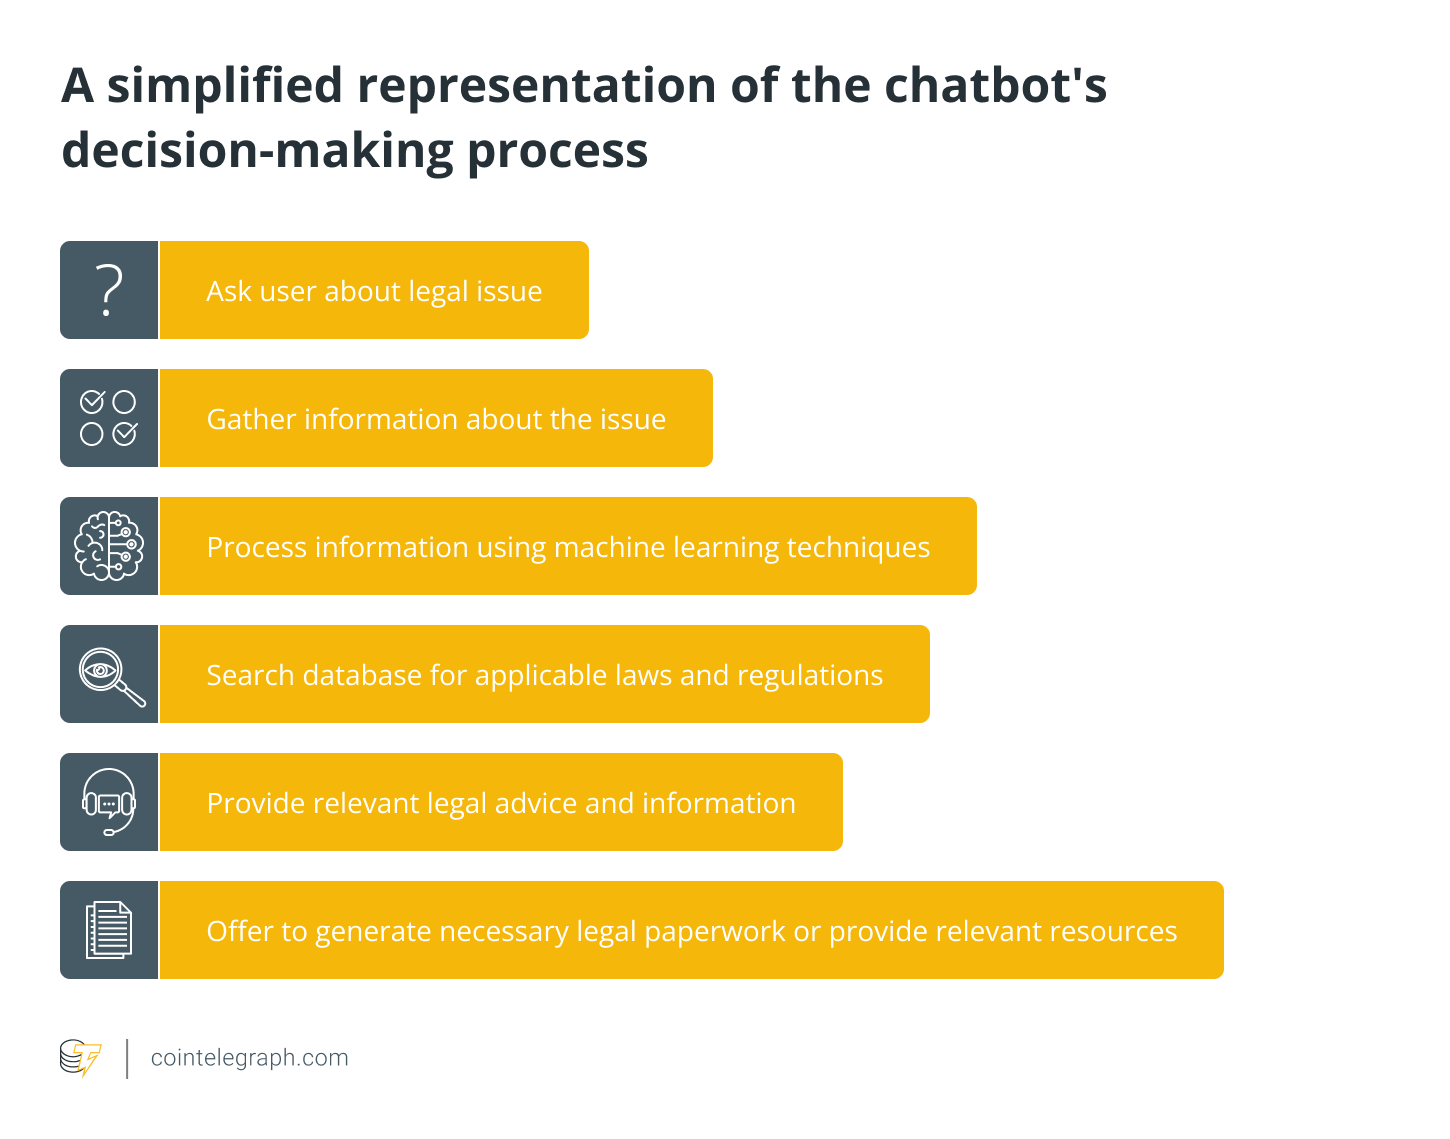 A simplified representation of the chatbots decision-making process